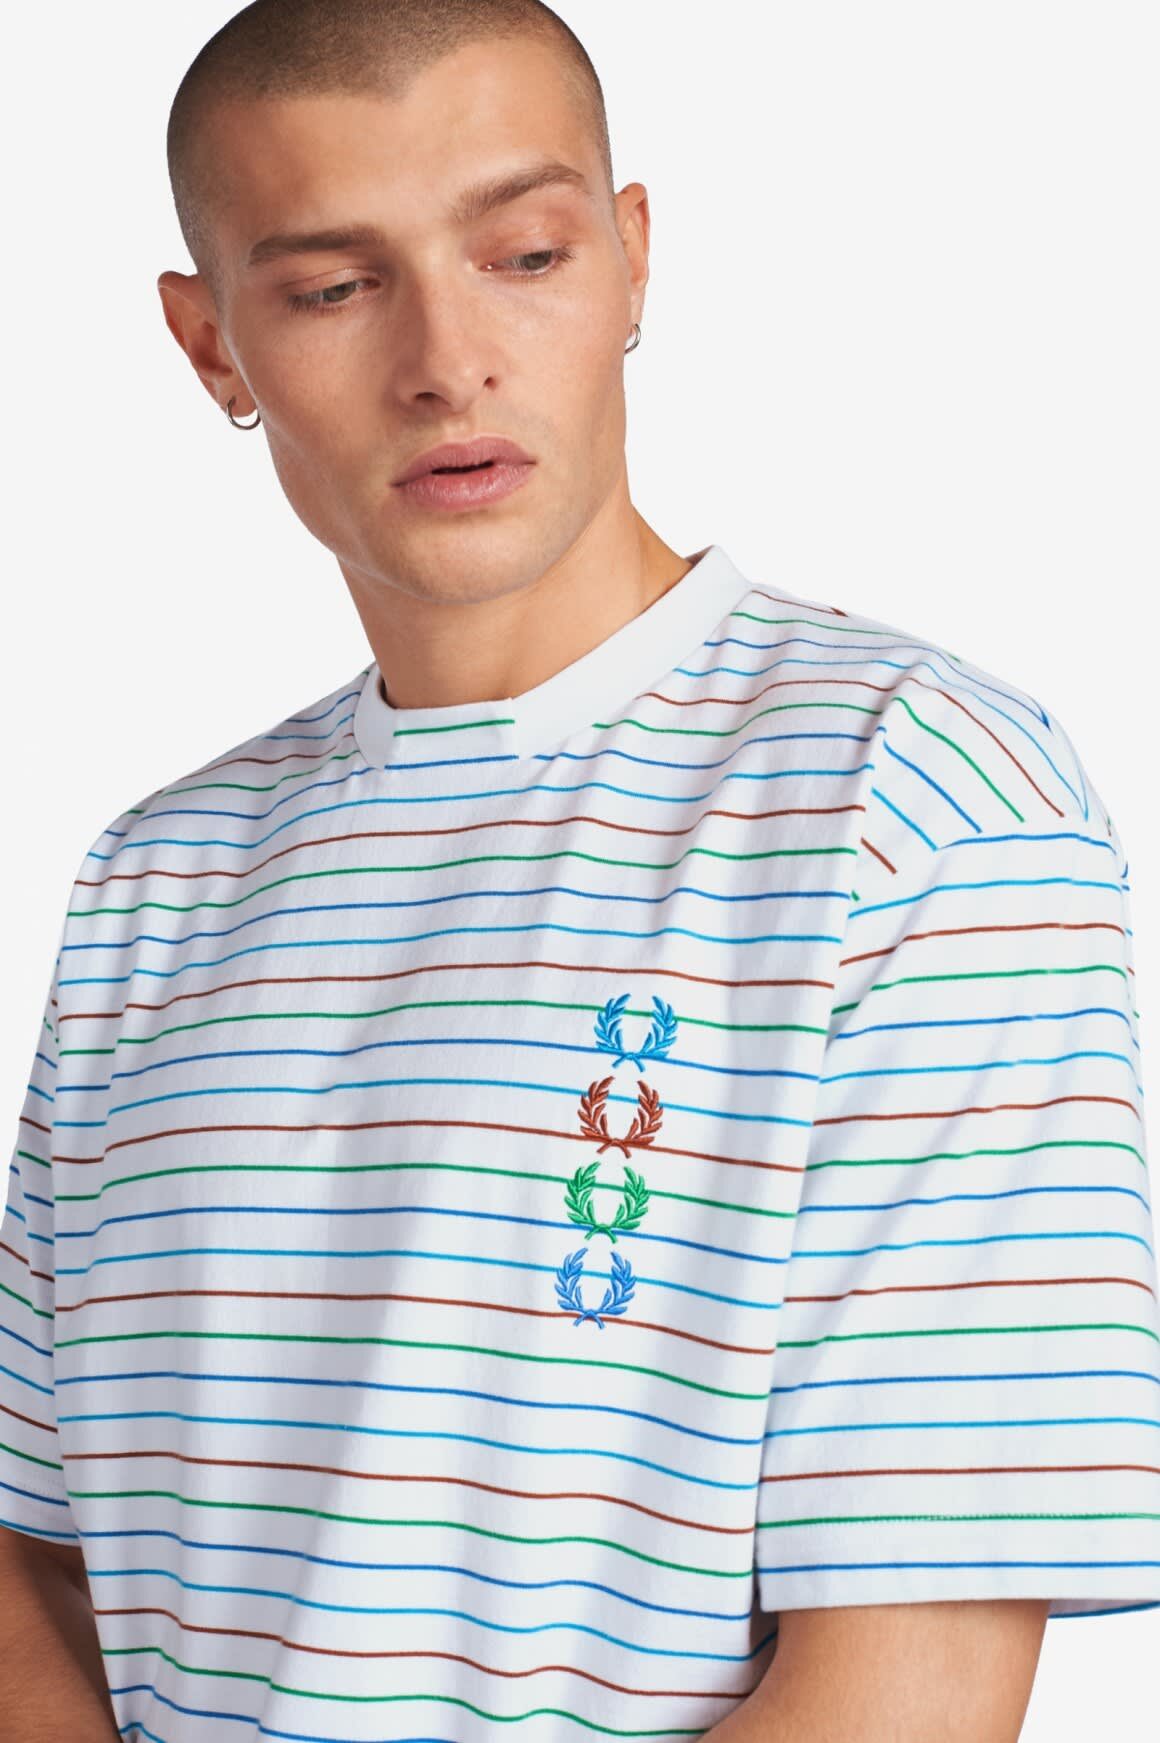 fred-perry2.jpg